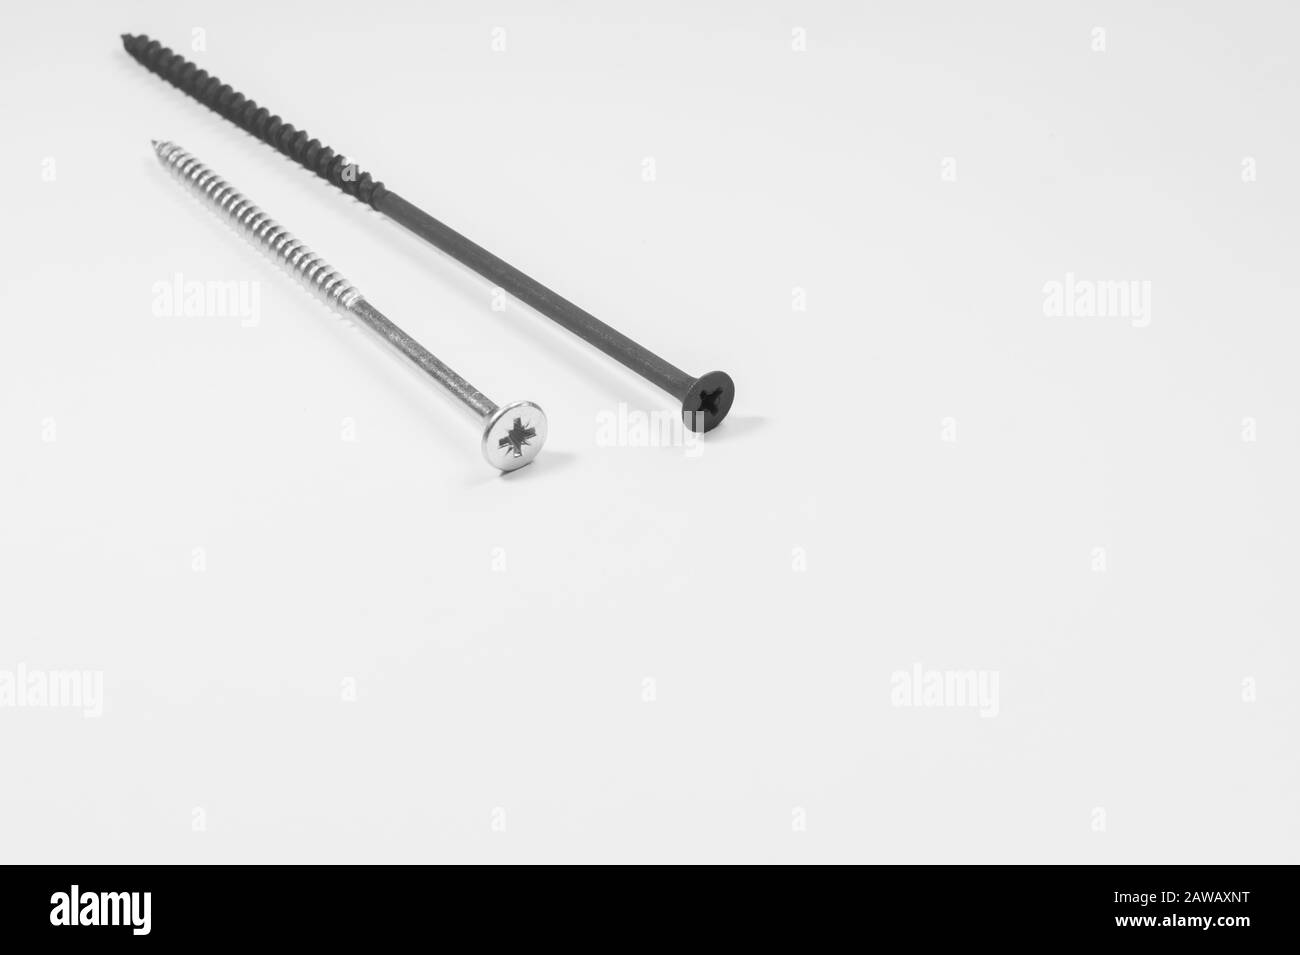 Steel screw on a white background. working tools Stock Photo